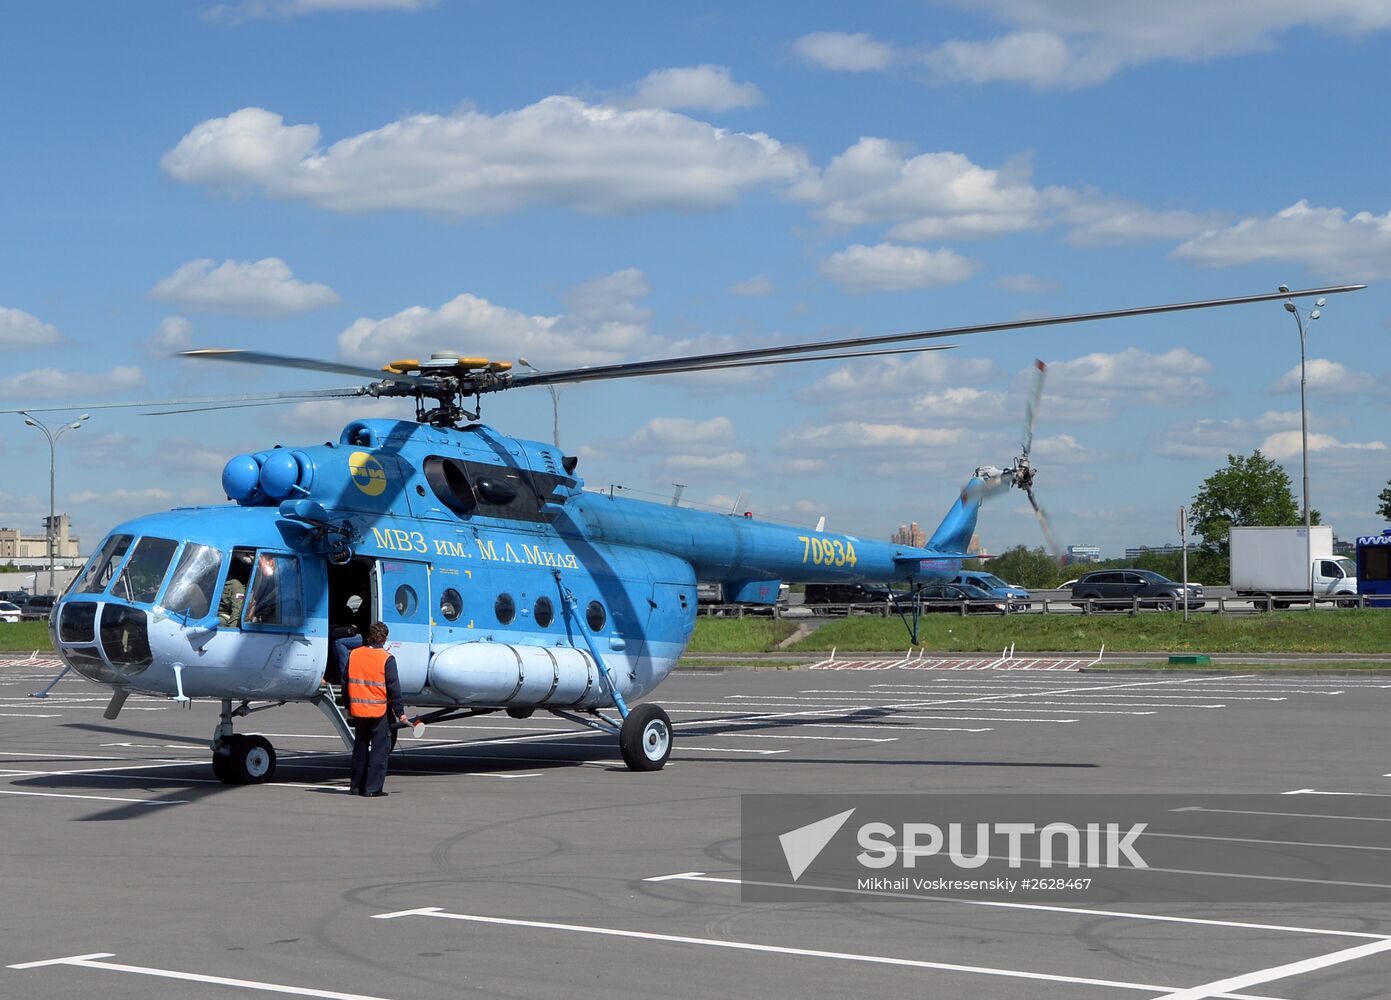 Helicopters arrive for HeliRussia 2015 expo